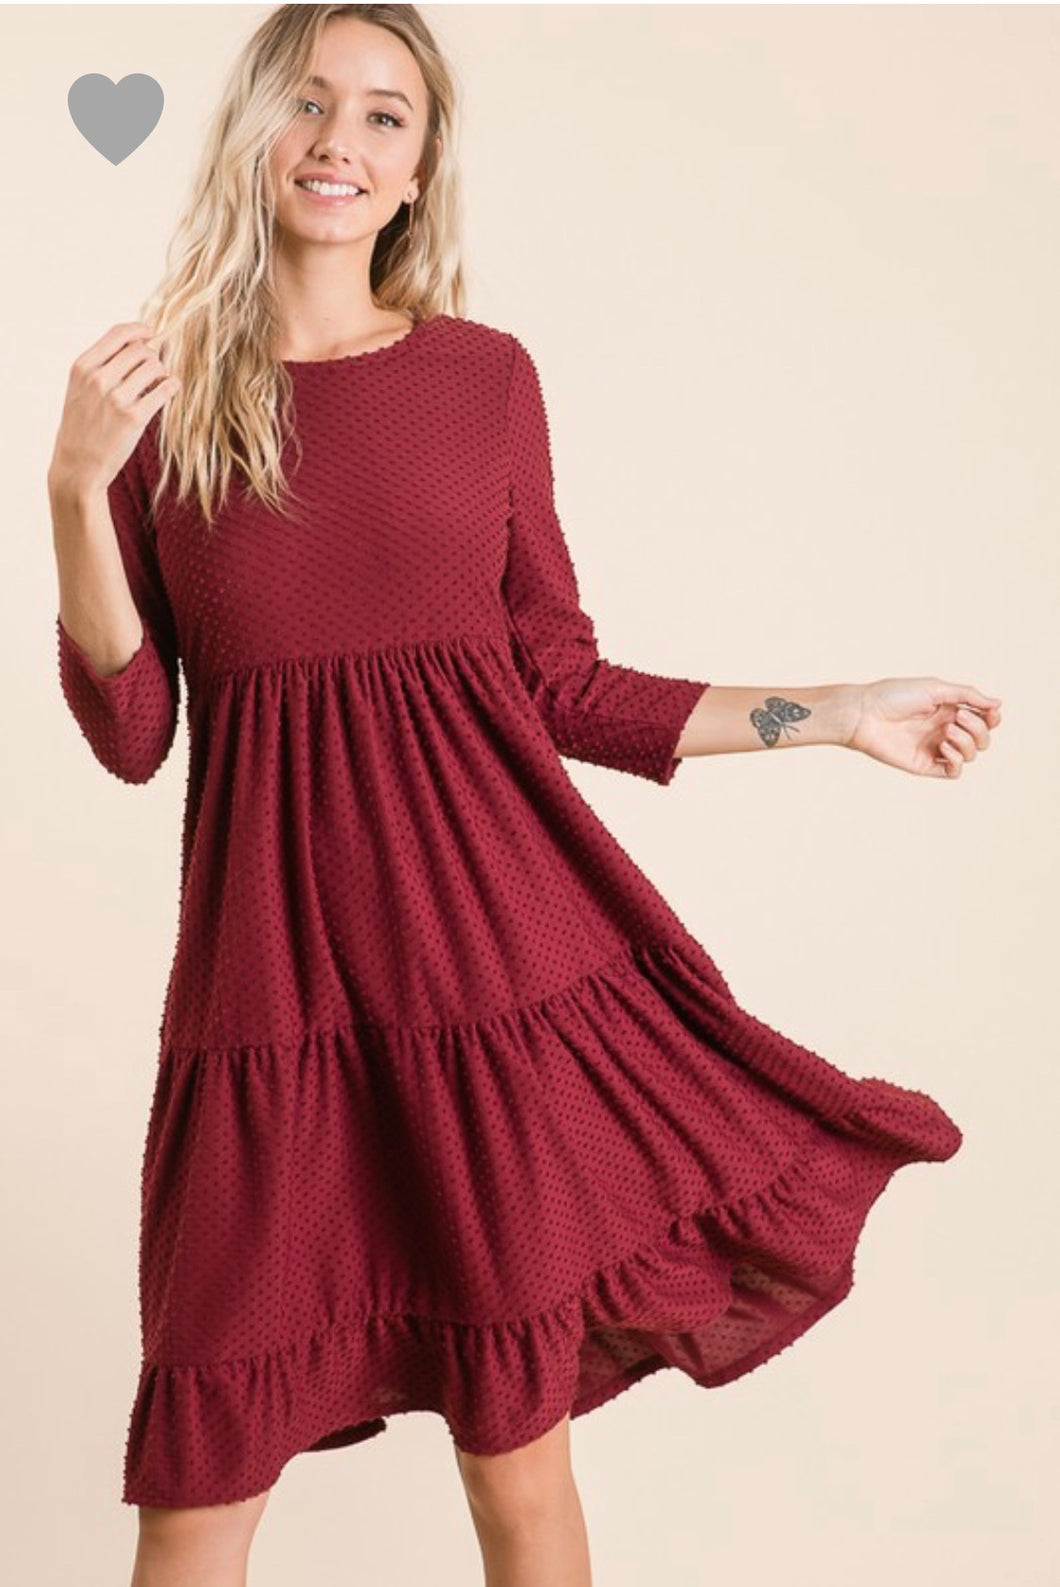 short sleeve burgundy with dot textured short dress that goes to knees. cinches at the small of the waist and flows out tiered on the bottom half